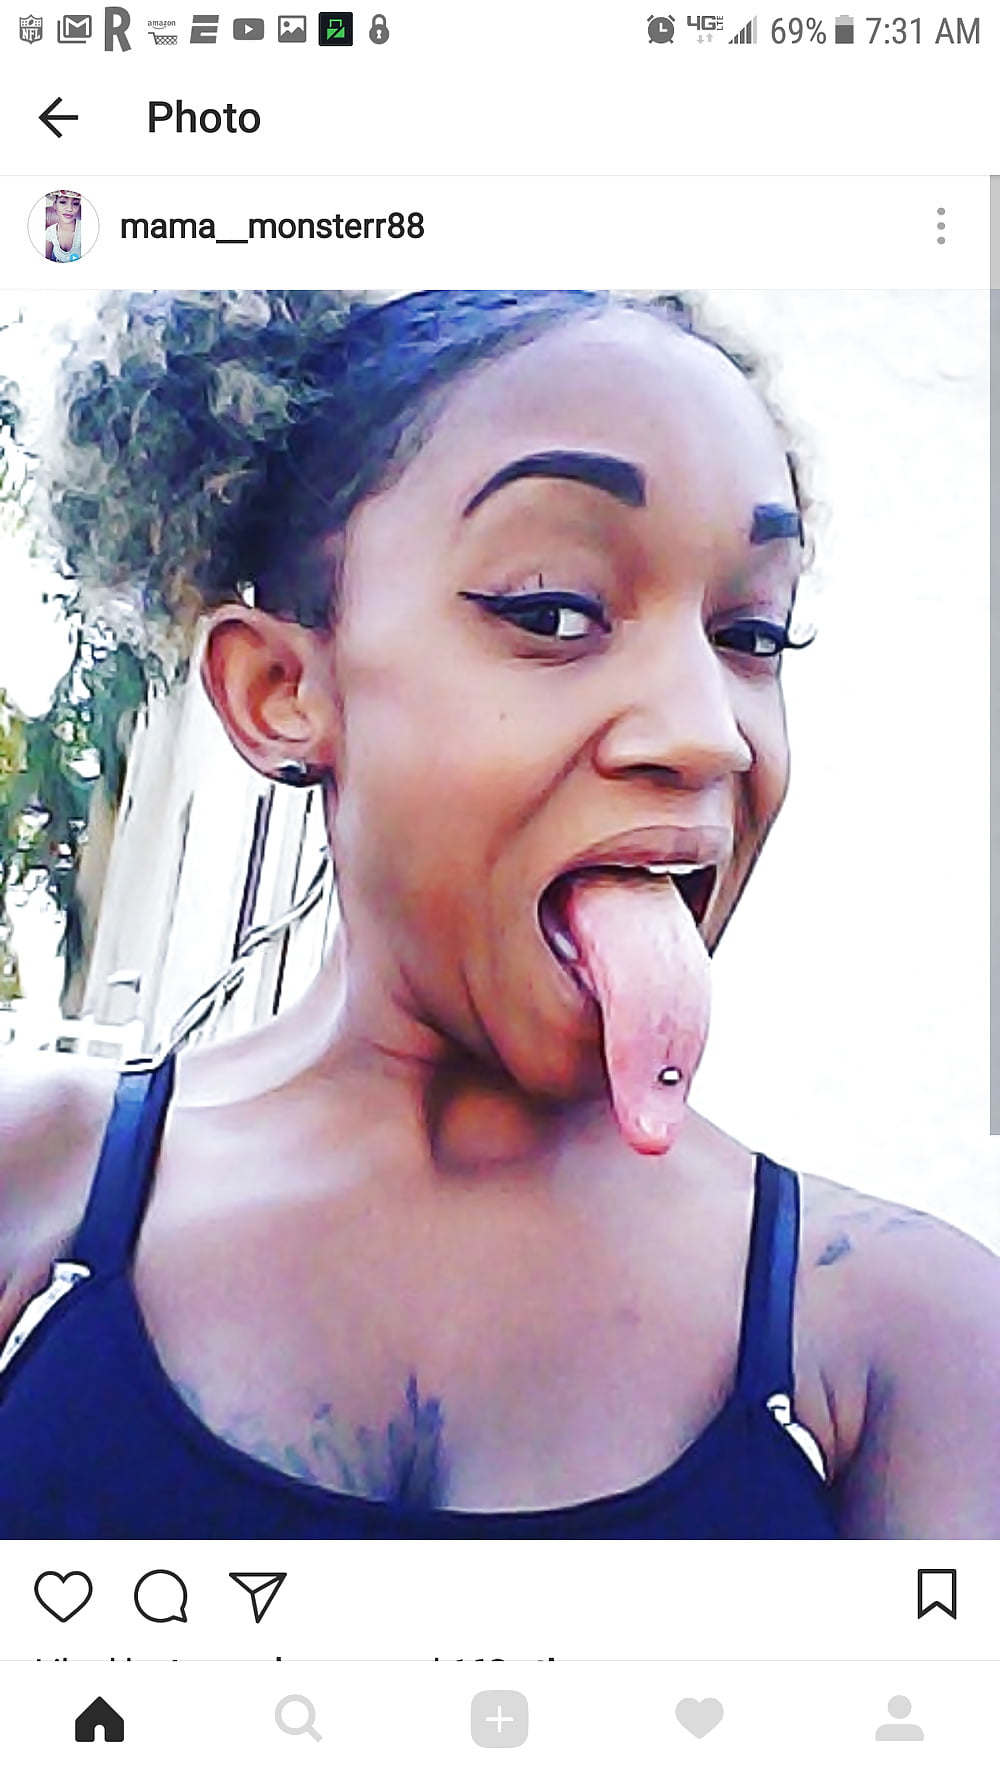 Long tongue only fans